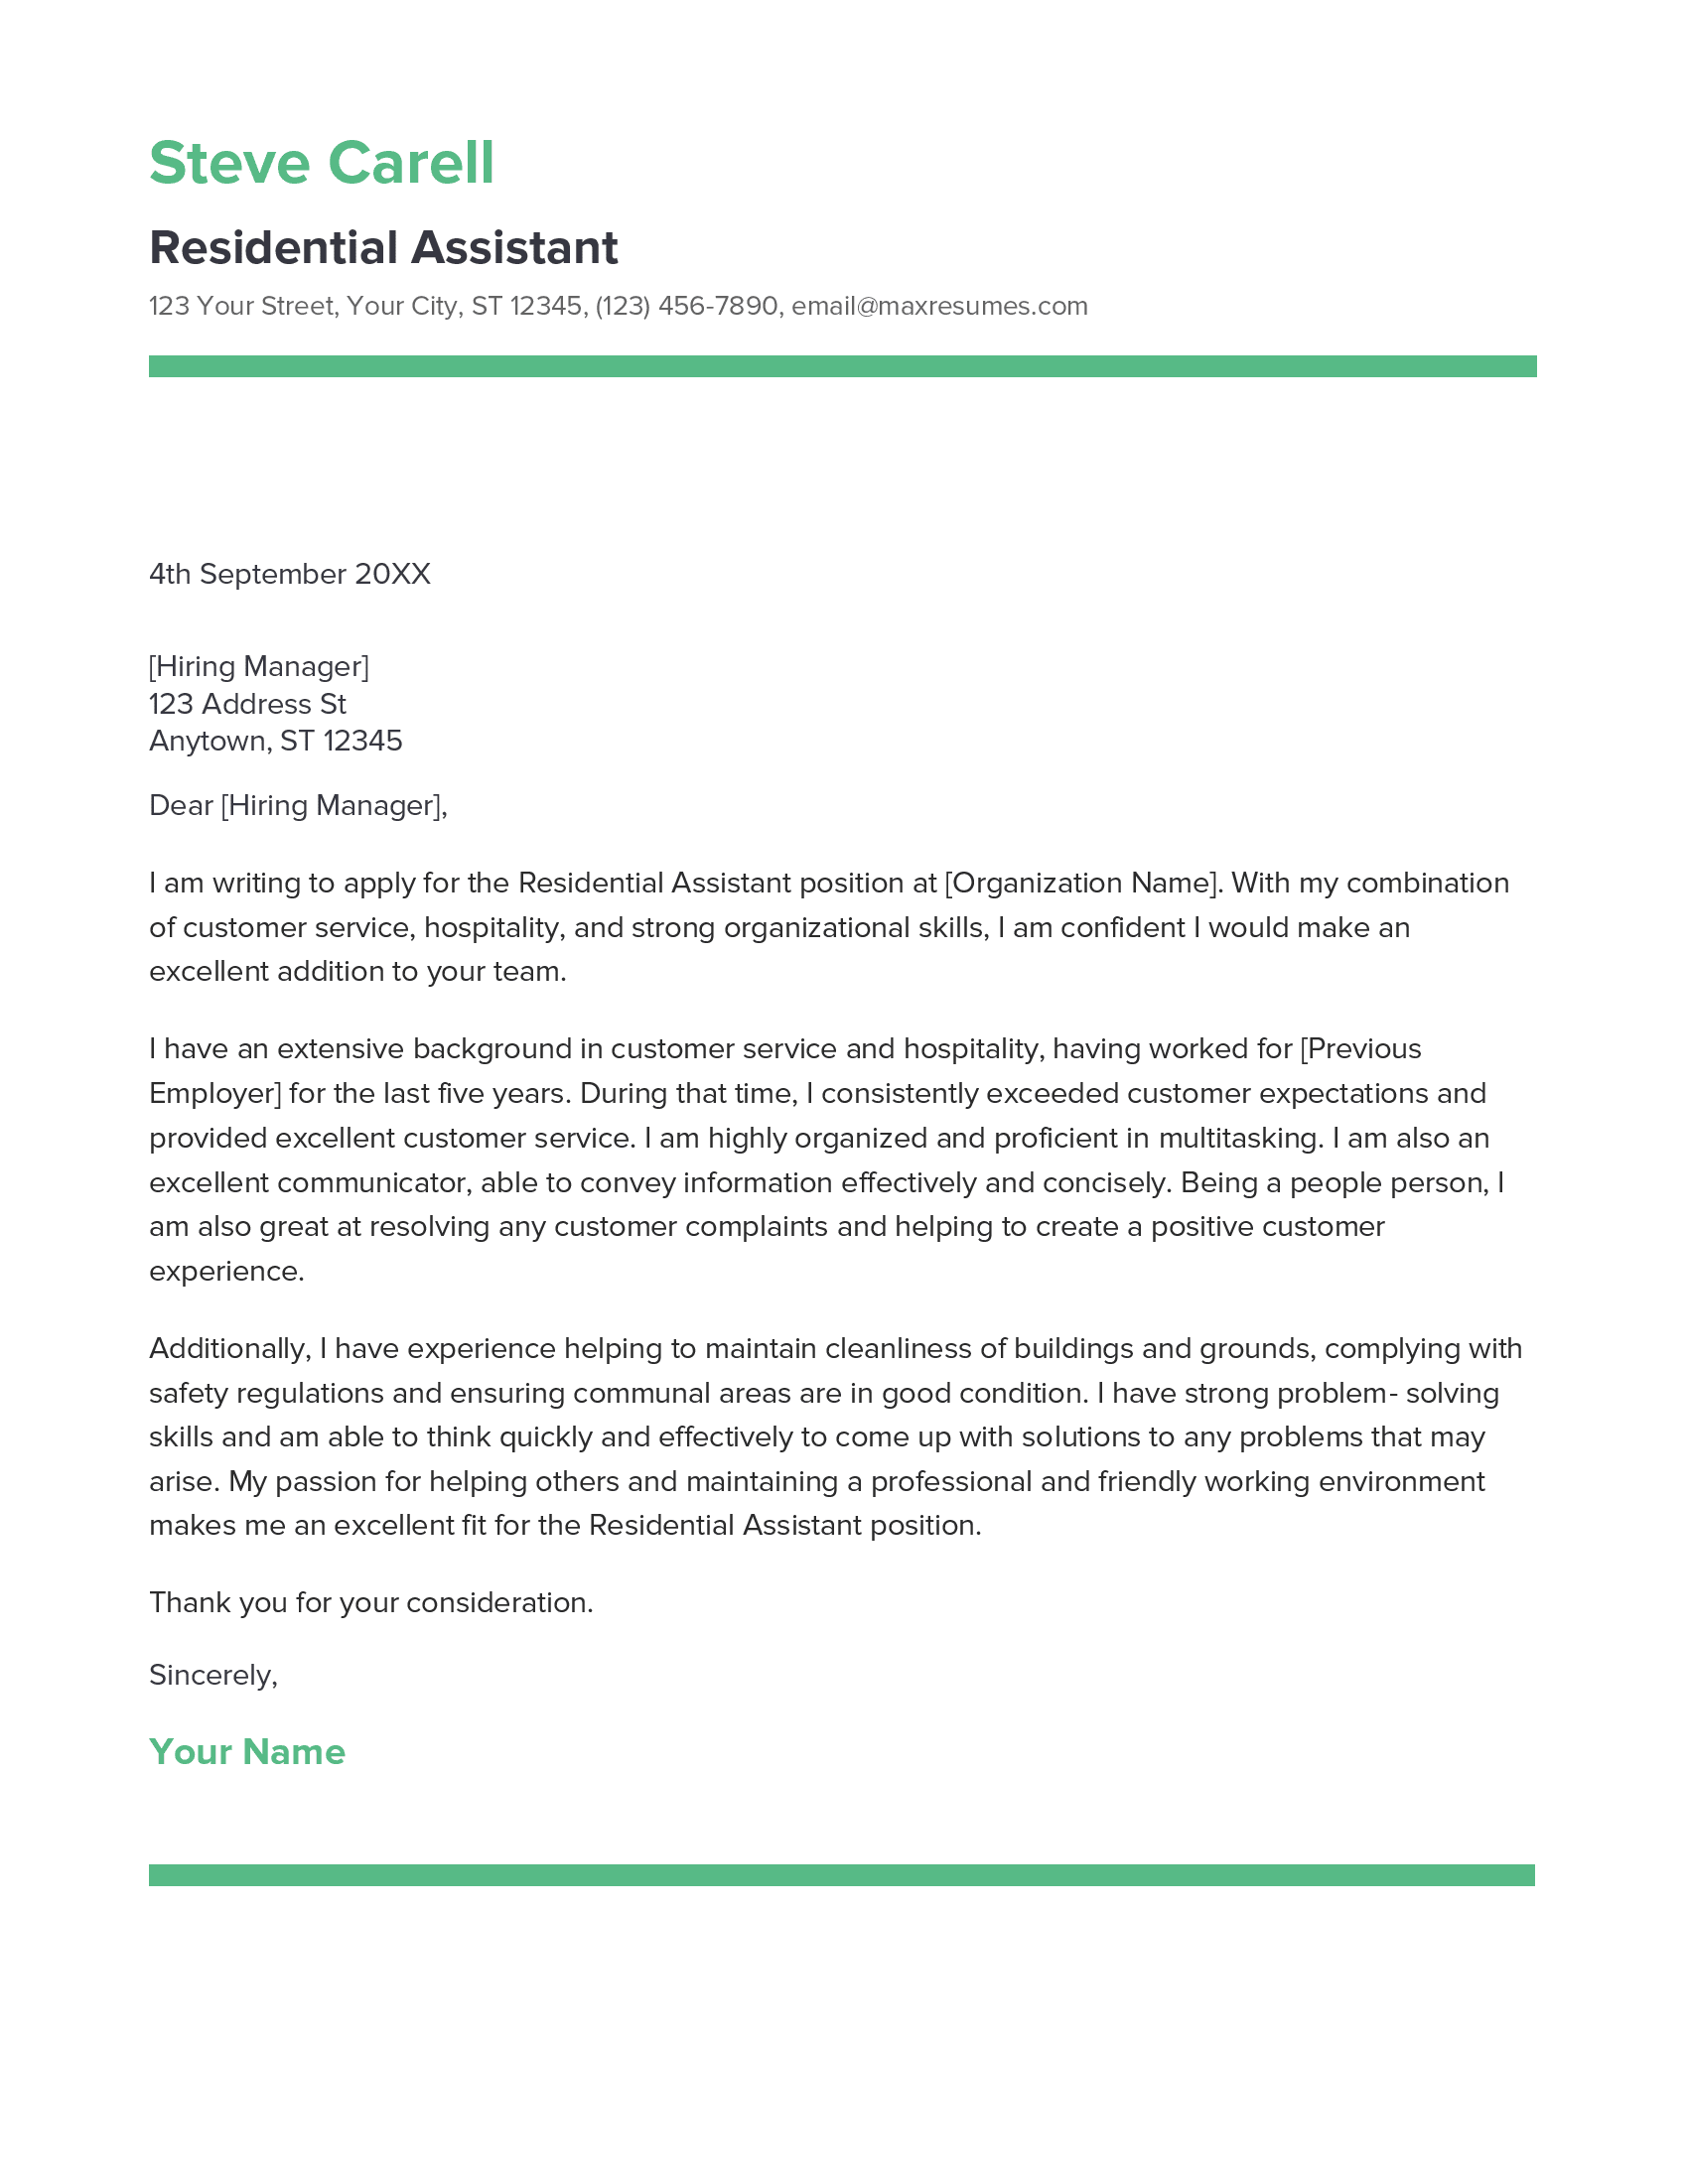 Residential Assistant Cover Letter Example